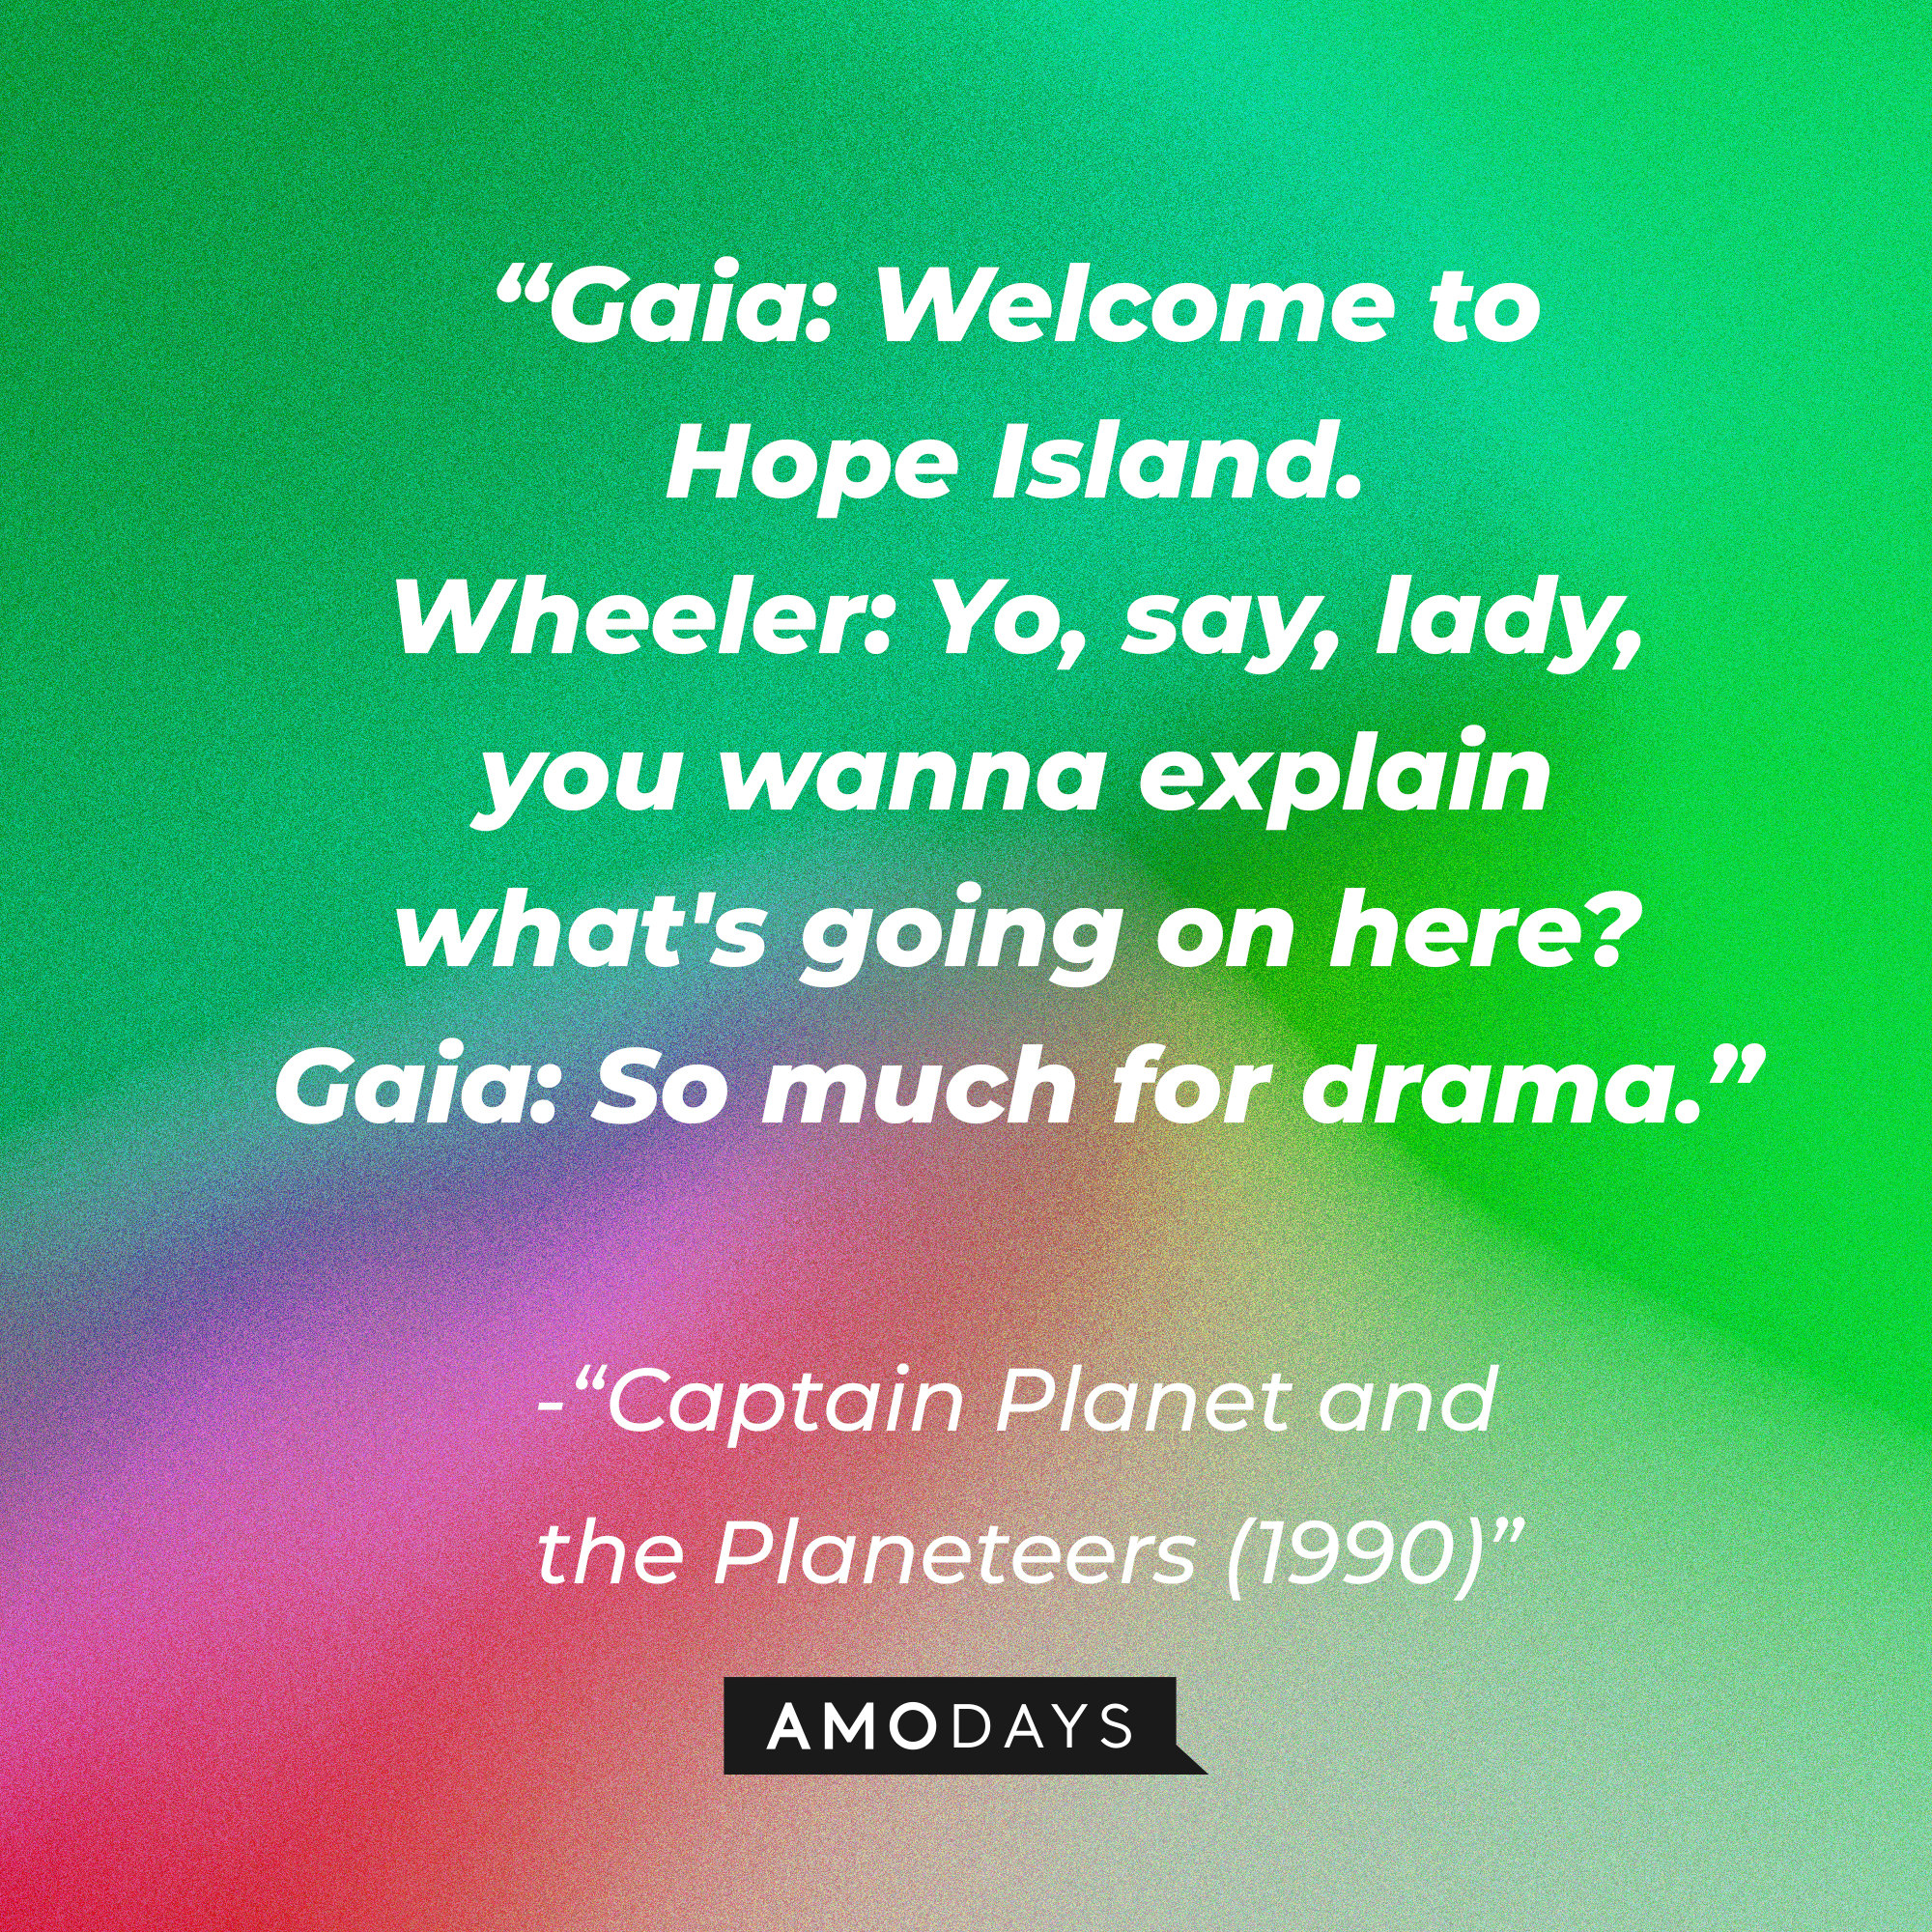 “Captain Planet and the Planeteers (1990)” dialogue: “Gaia: Welcome to Hope Island. Wheeler: Yo, say, lady, you wanna explain what's going on here? Gaia: So much for drama.” | Source: Amodays